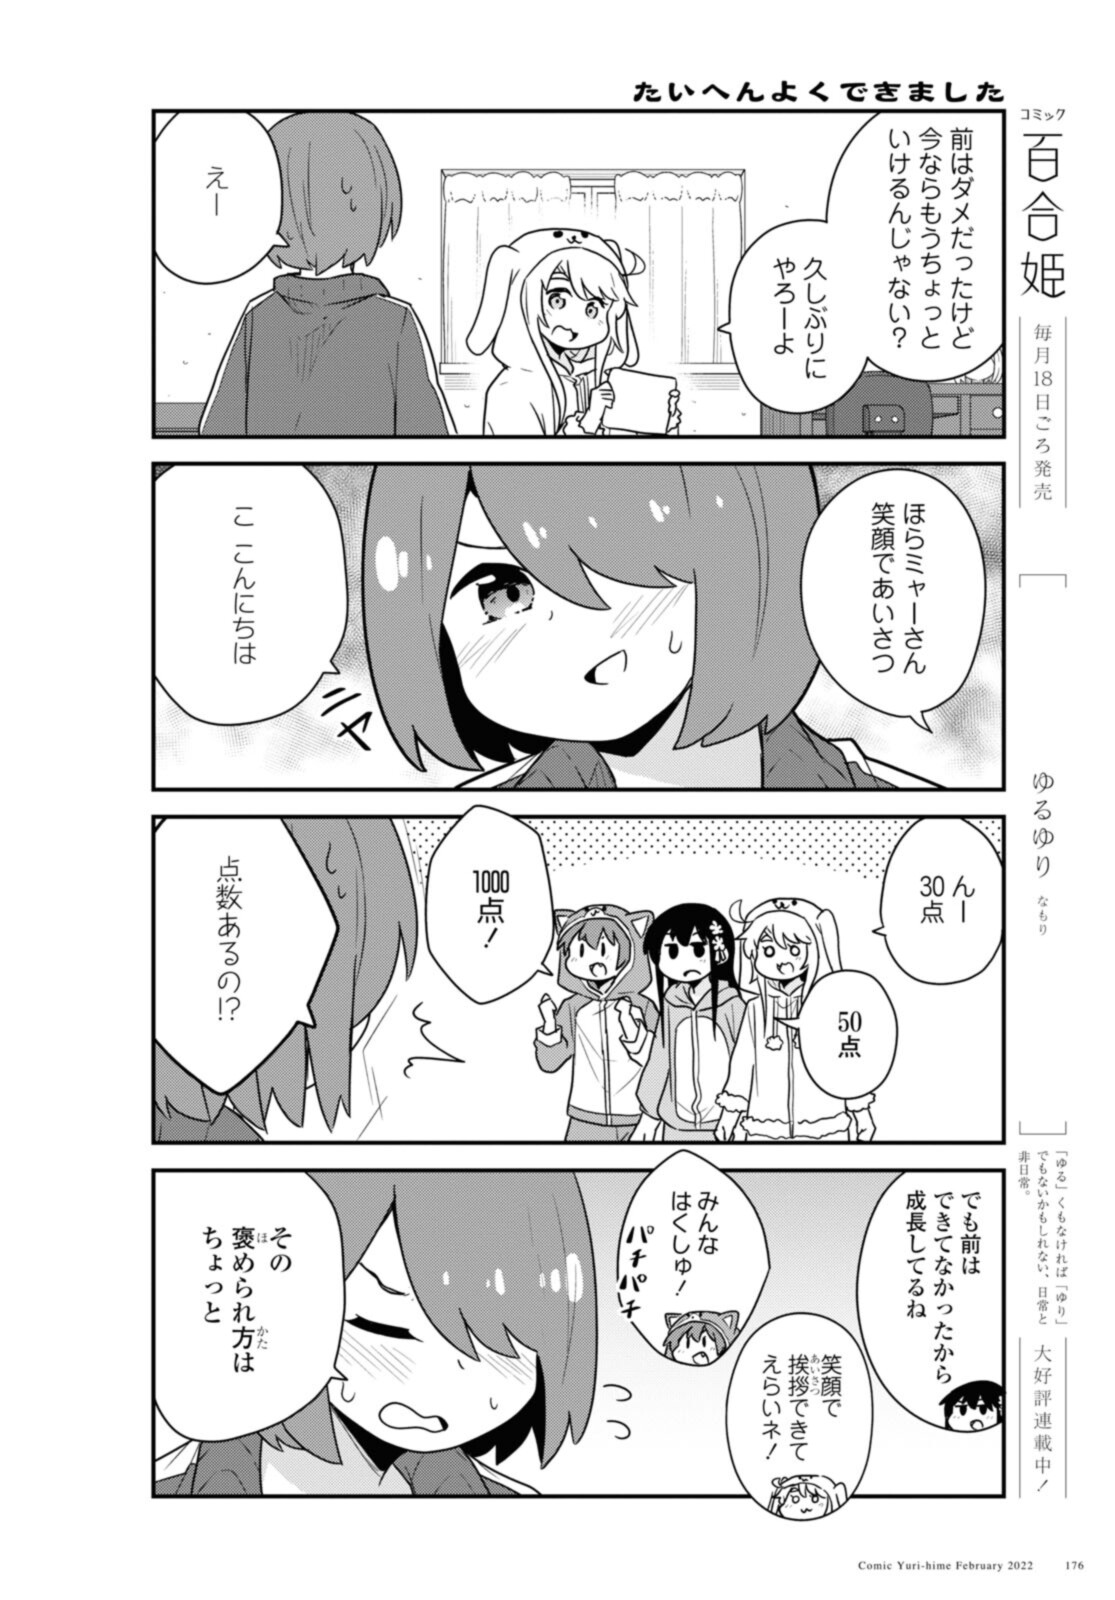 Wataten! An Angel Flew Down to Me 私に天使が舞い降りた！ 第92話 - Page 12